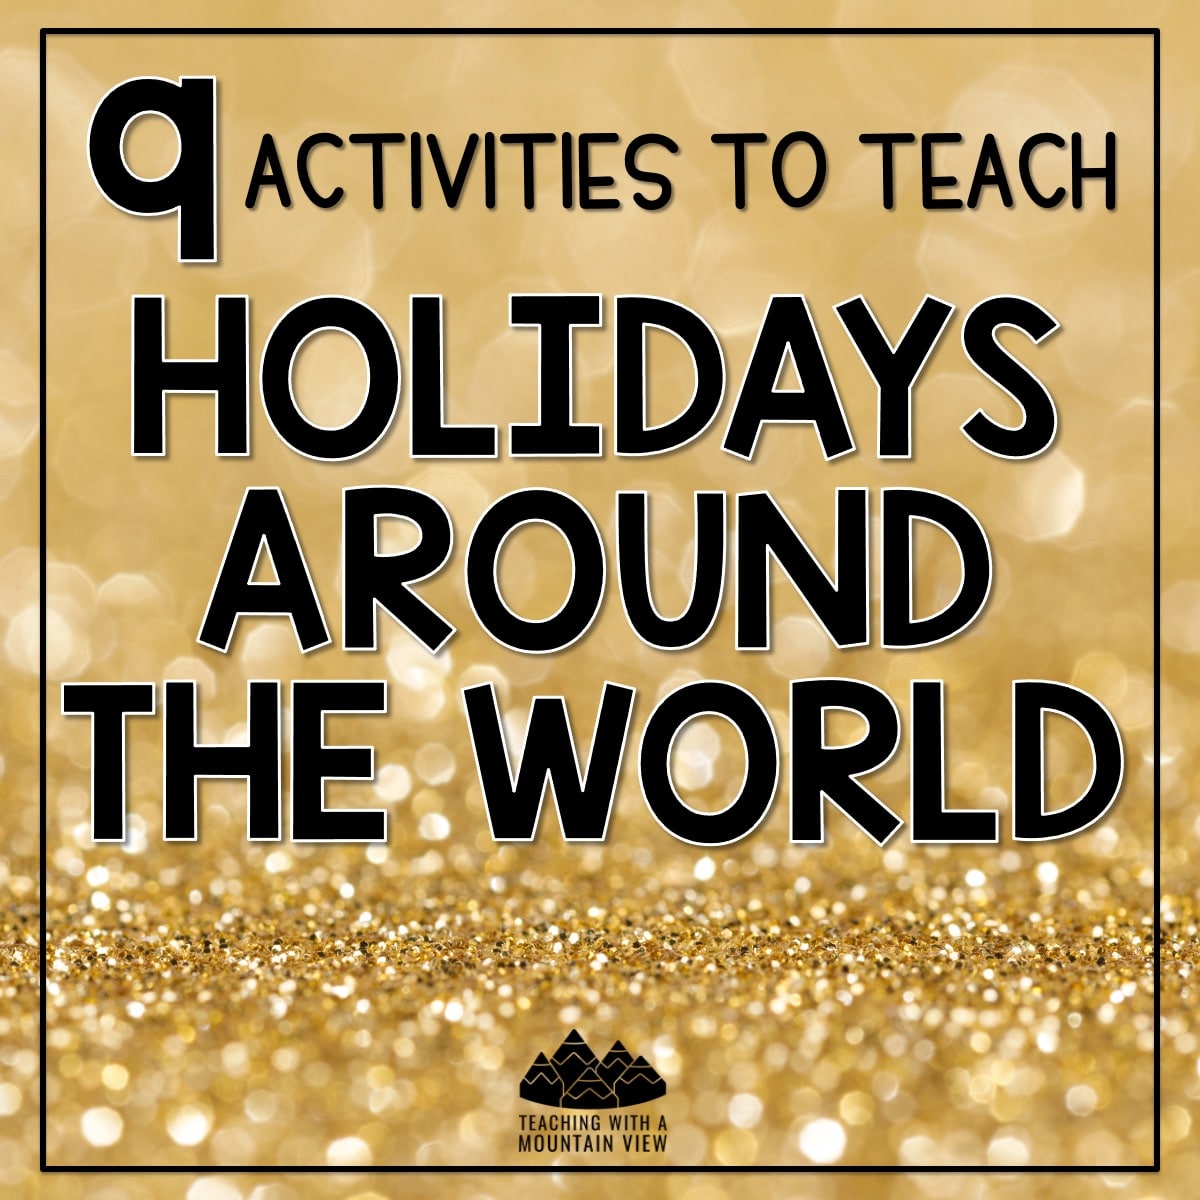 Here are 9 fun upper elementary classroom activities for holidays around the world! Includes everything from pen pals and a trip to writing creative resolutions.